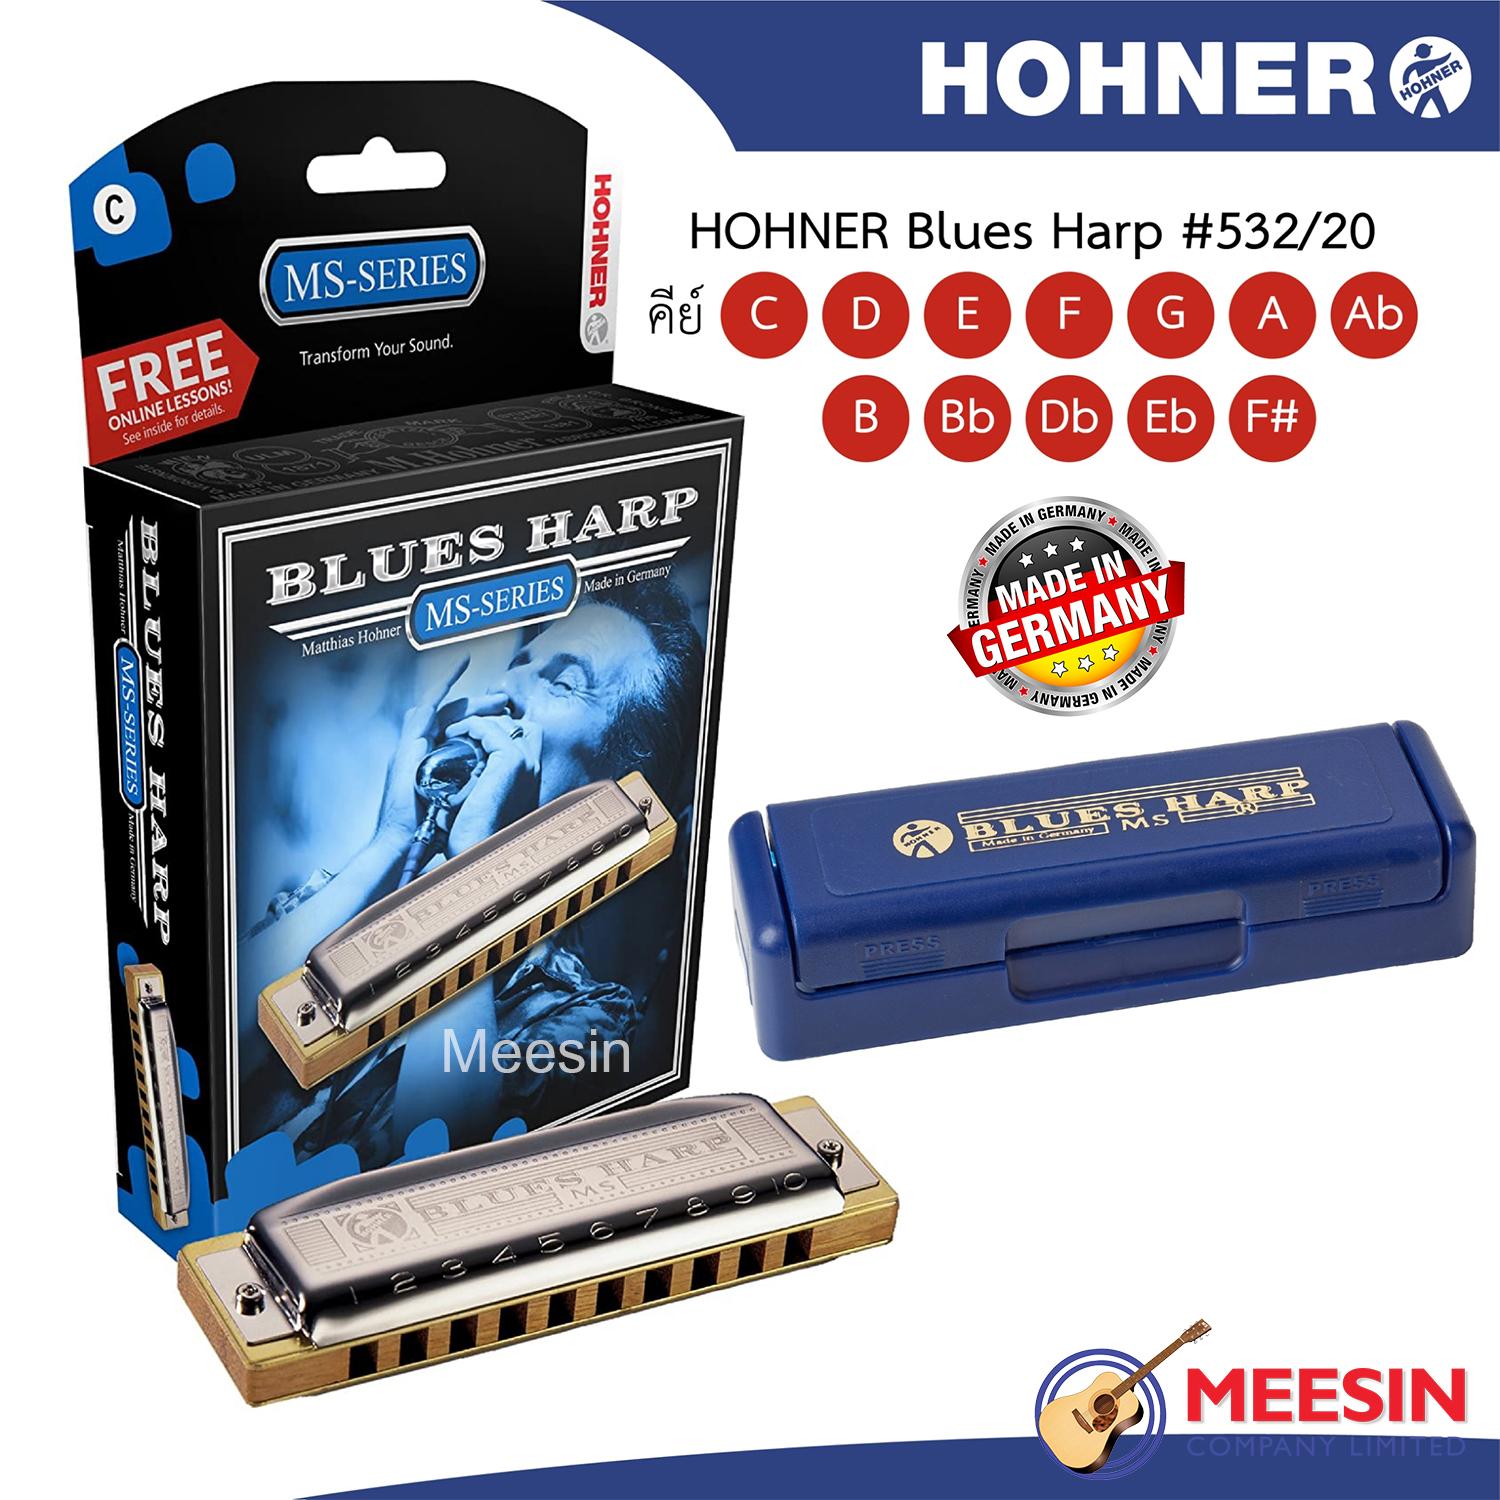 Hohner® Blues Harp 10-Hole Harmonica MS-Series 532/20 FREE! Hard Case & Online Course *** Made in Germany ***